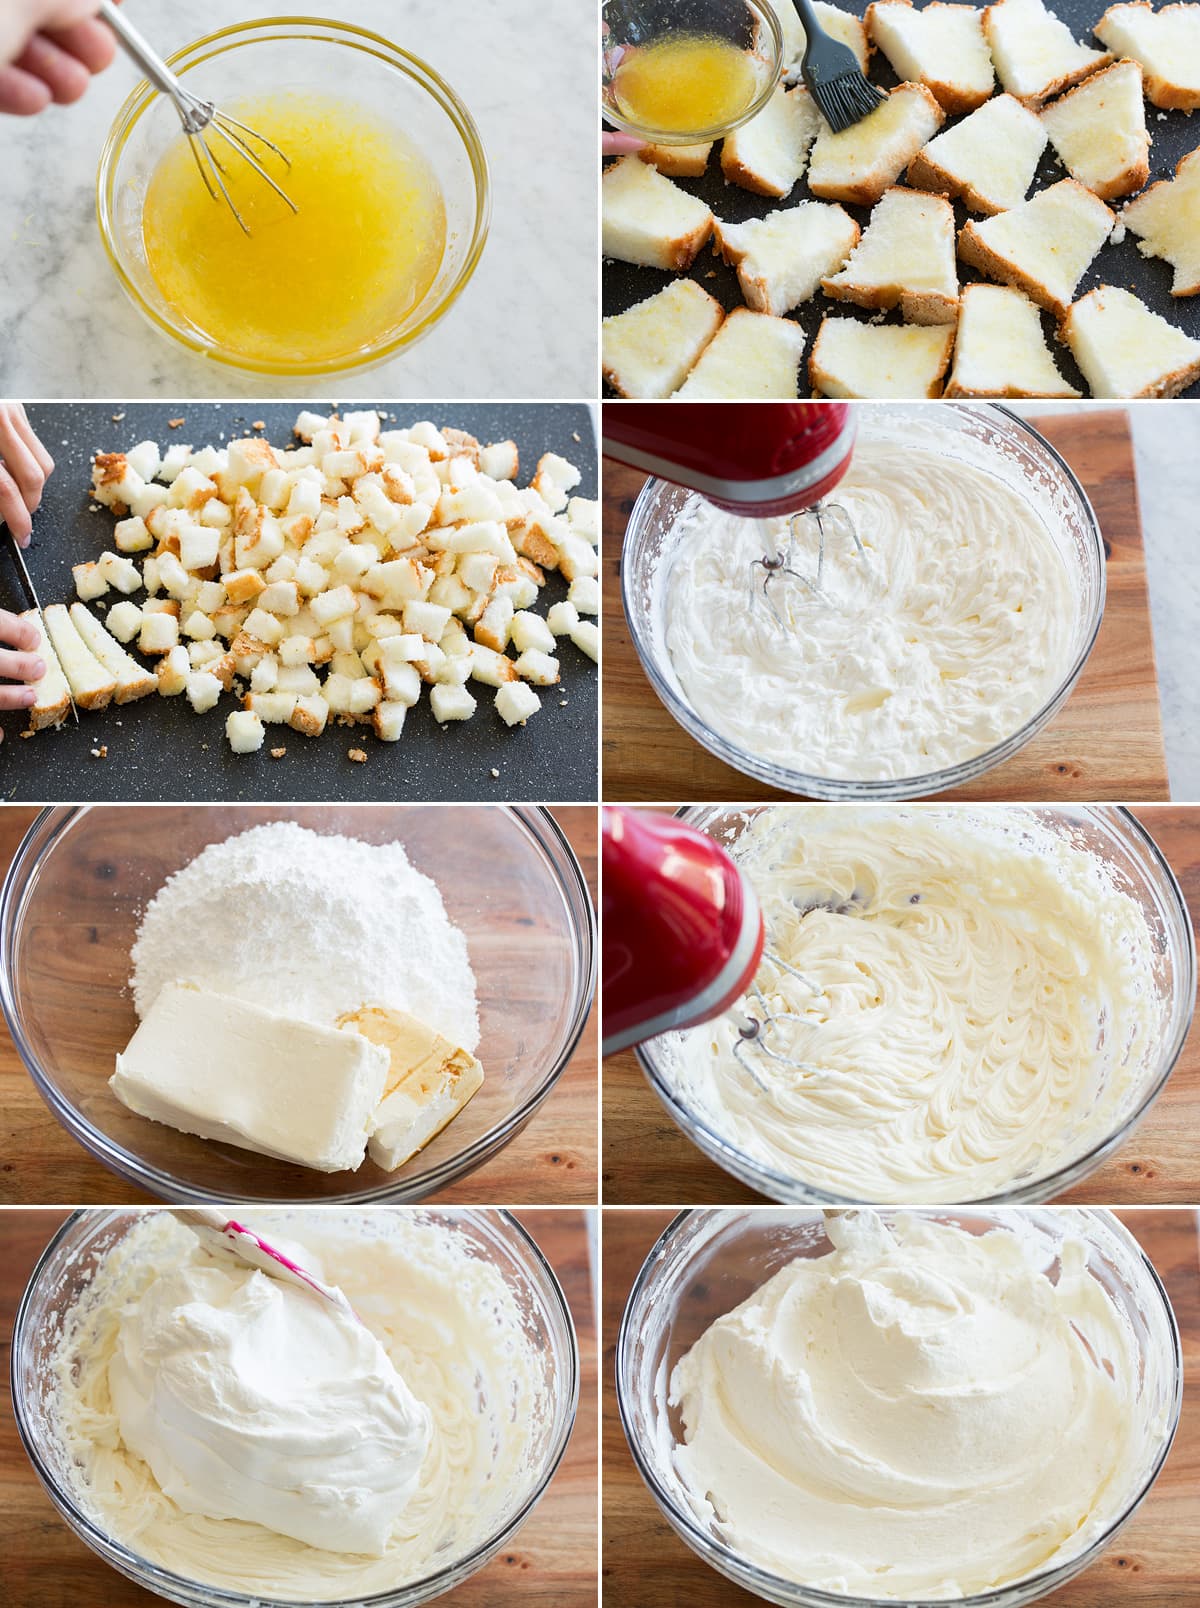 Collage of eight images showing how to prepare the cake portion and whipped topping portion of a trifle.